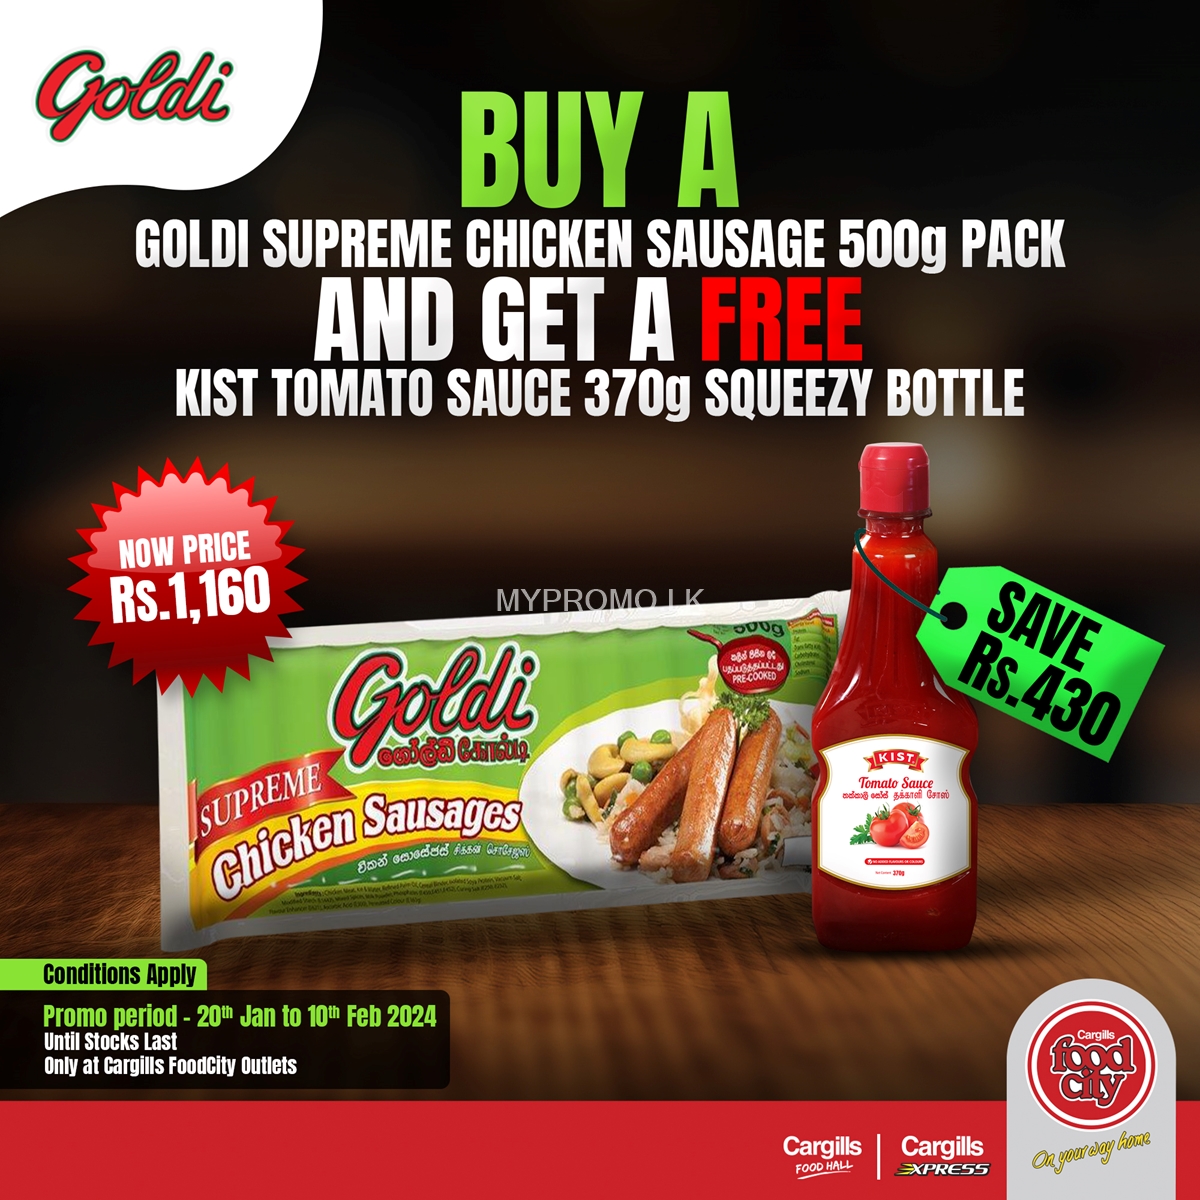 Buy a 500g Goldi Supreme Chicken Sausage pack for Rs.1160 and get 370g Kist Tomato Sauce squeezy bottle FREE at Cargills Food City